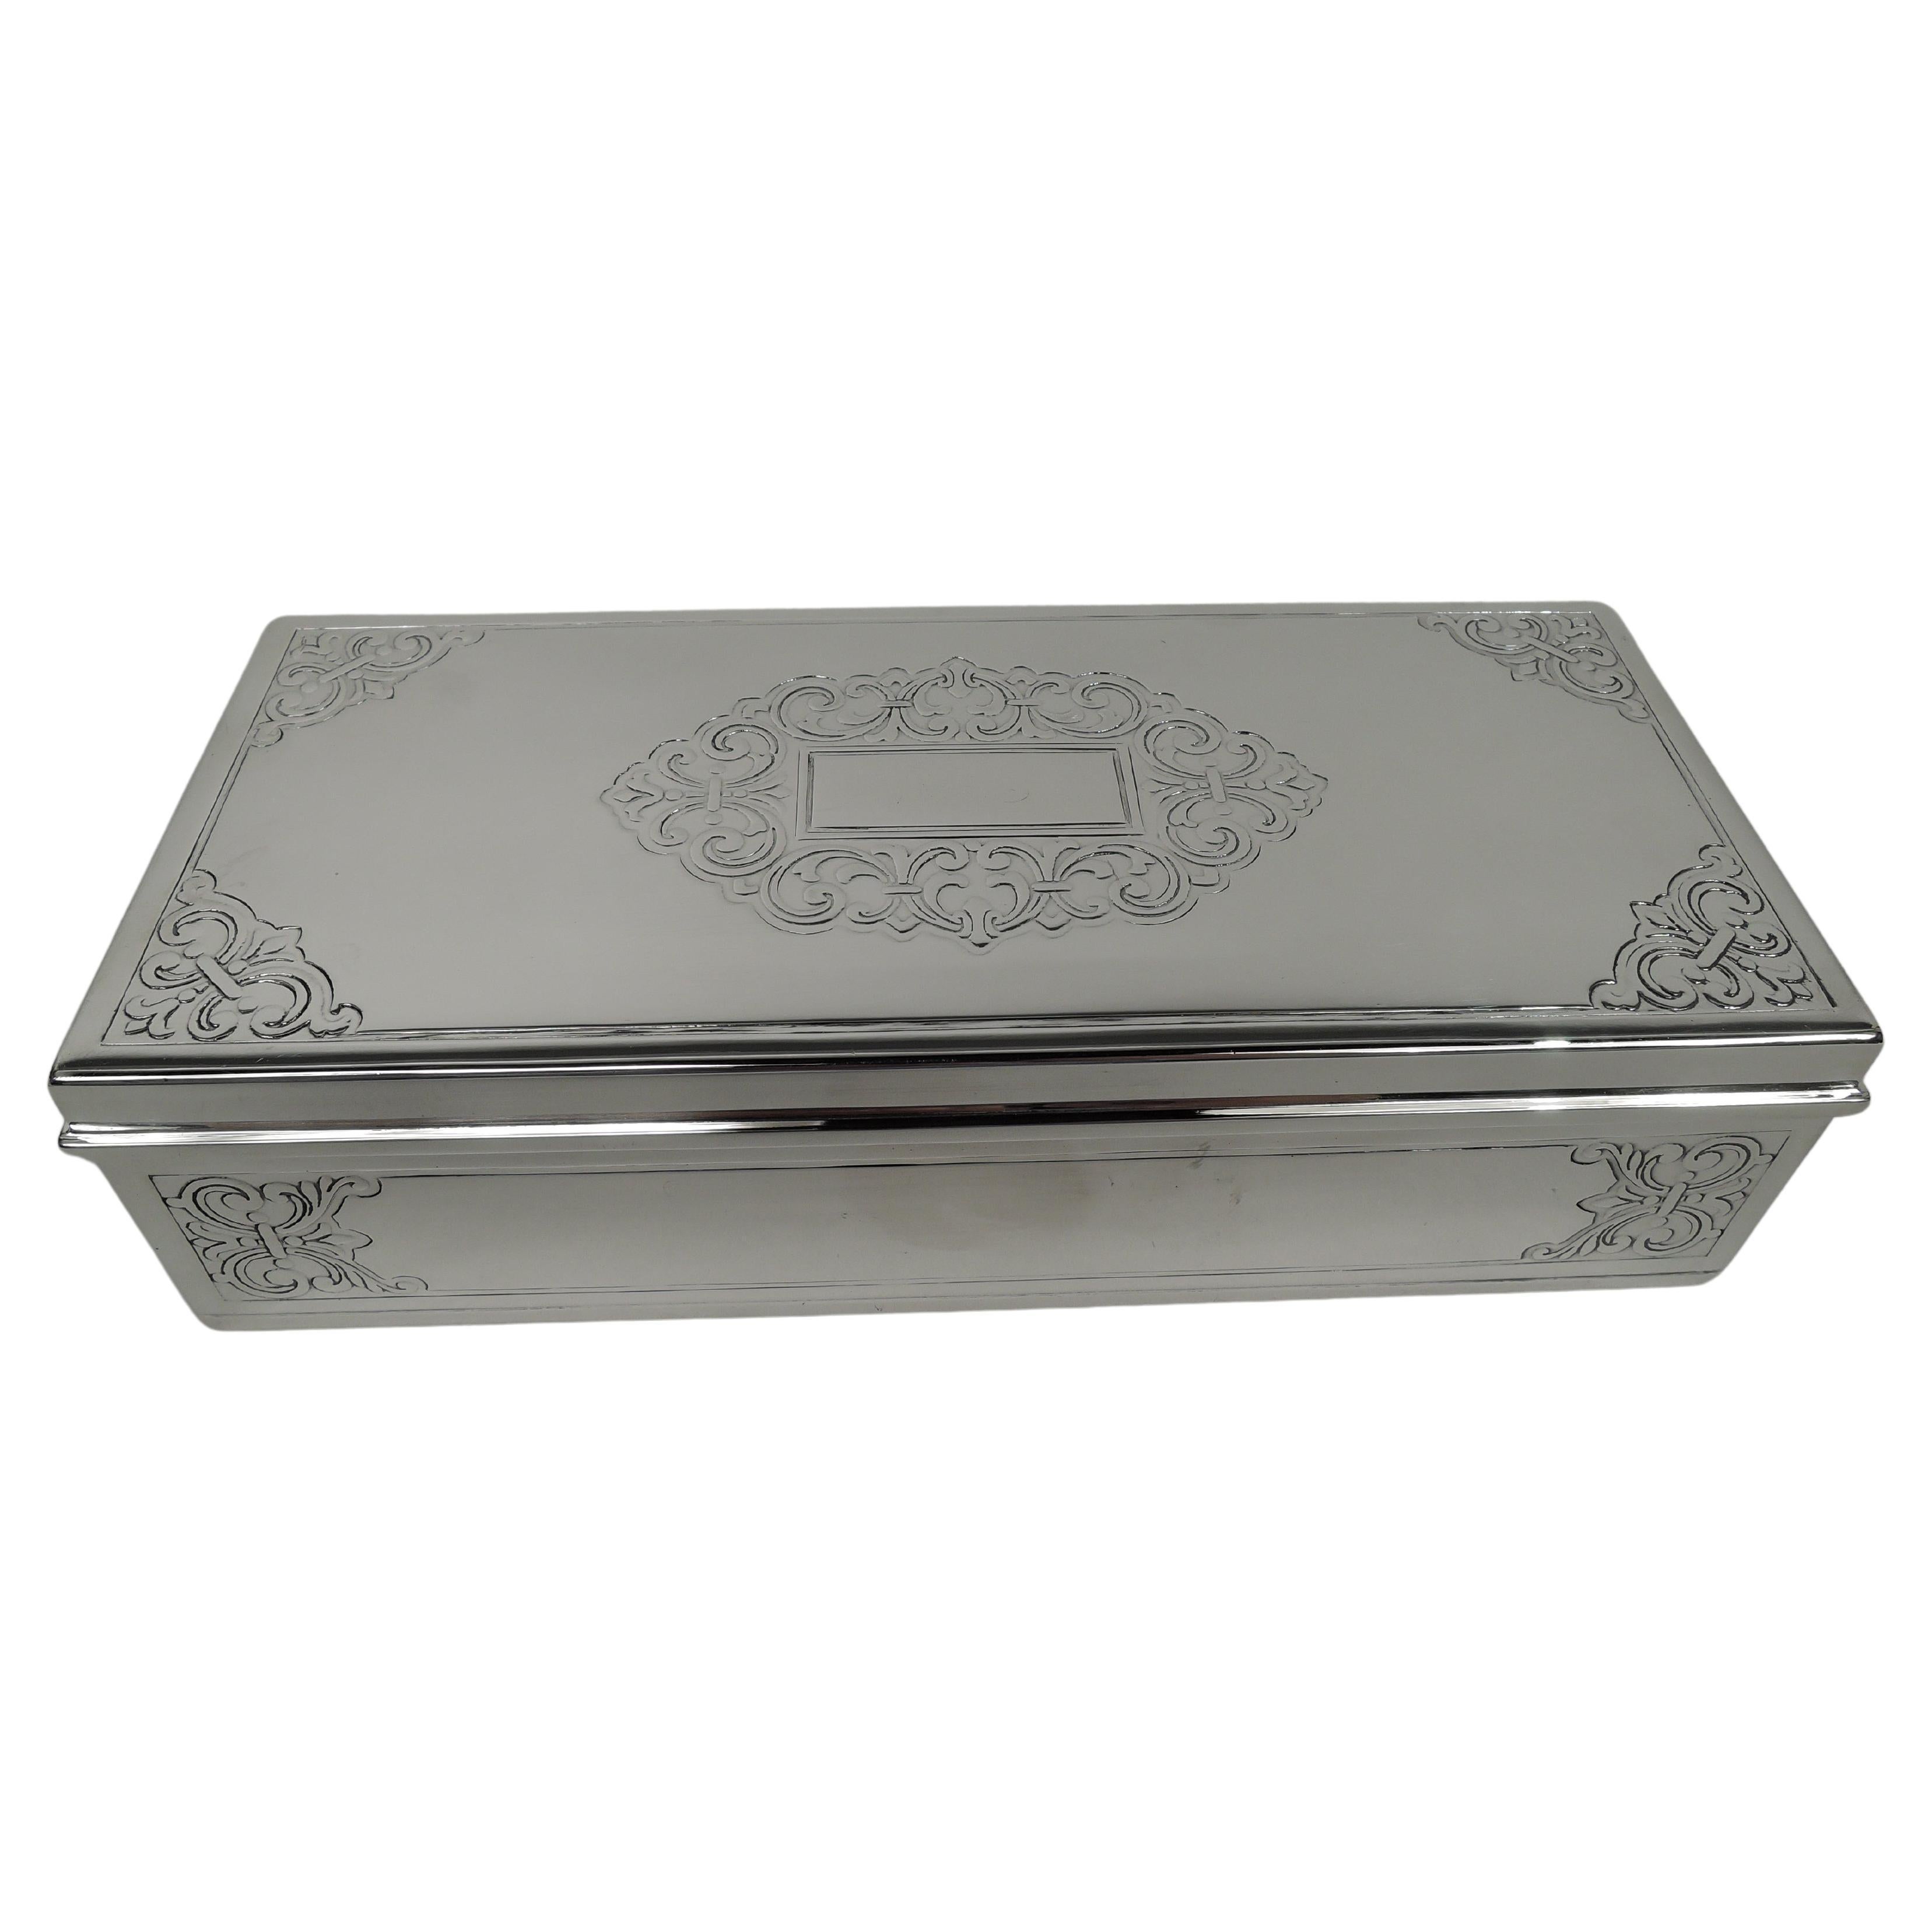 Tiffany Midcentury Modern Sterling Silver Box For Sale at 1stDibs